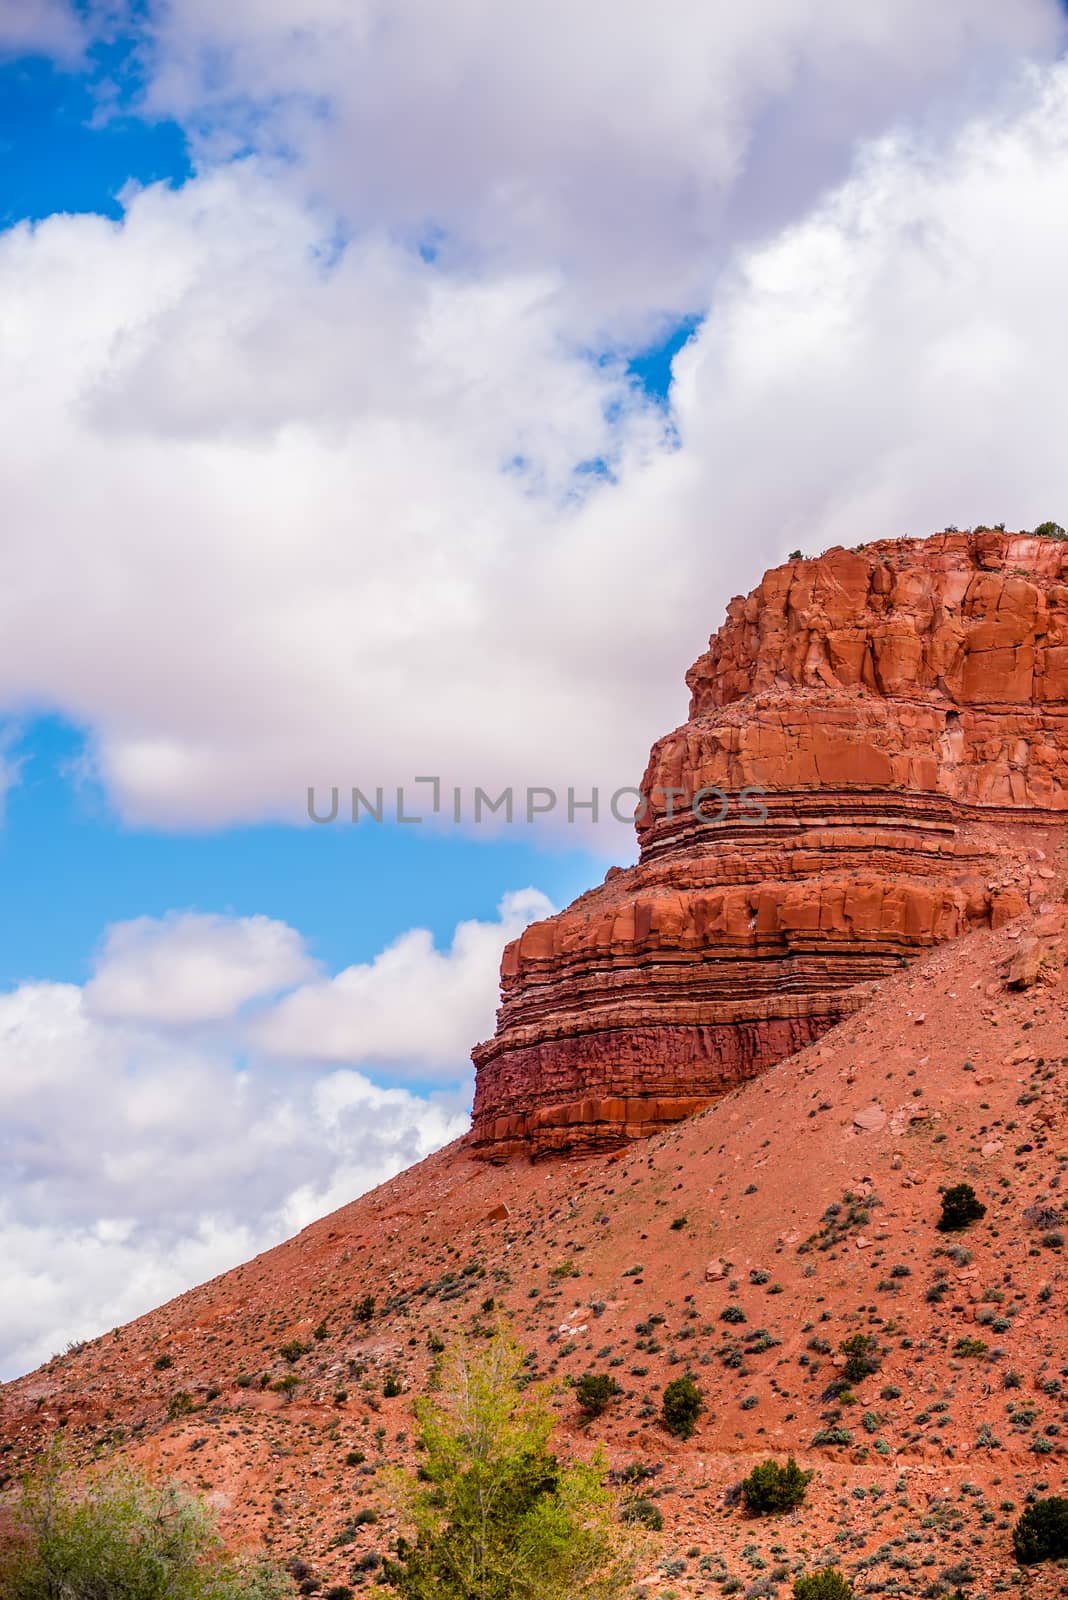 landscapes near abra kanabra and zion national park in utah by digidreamgrafix